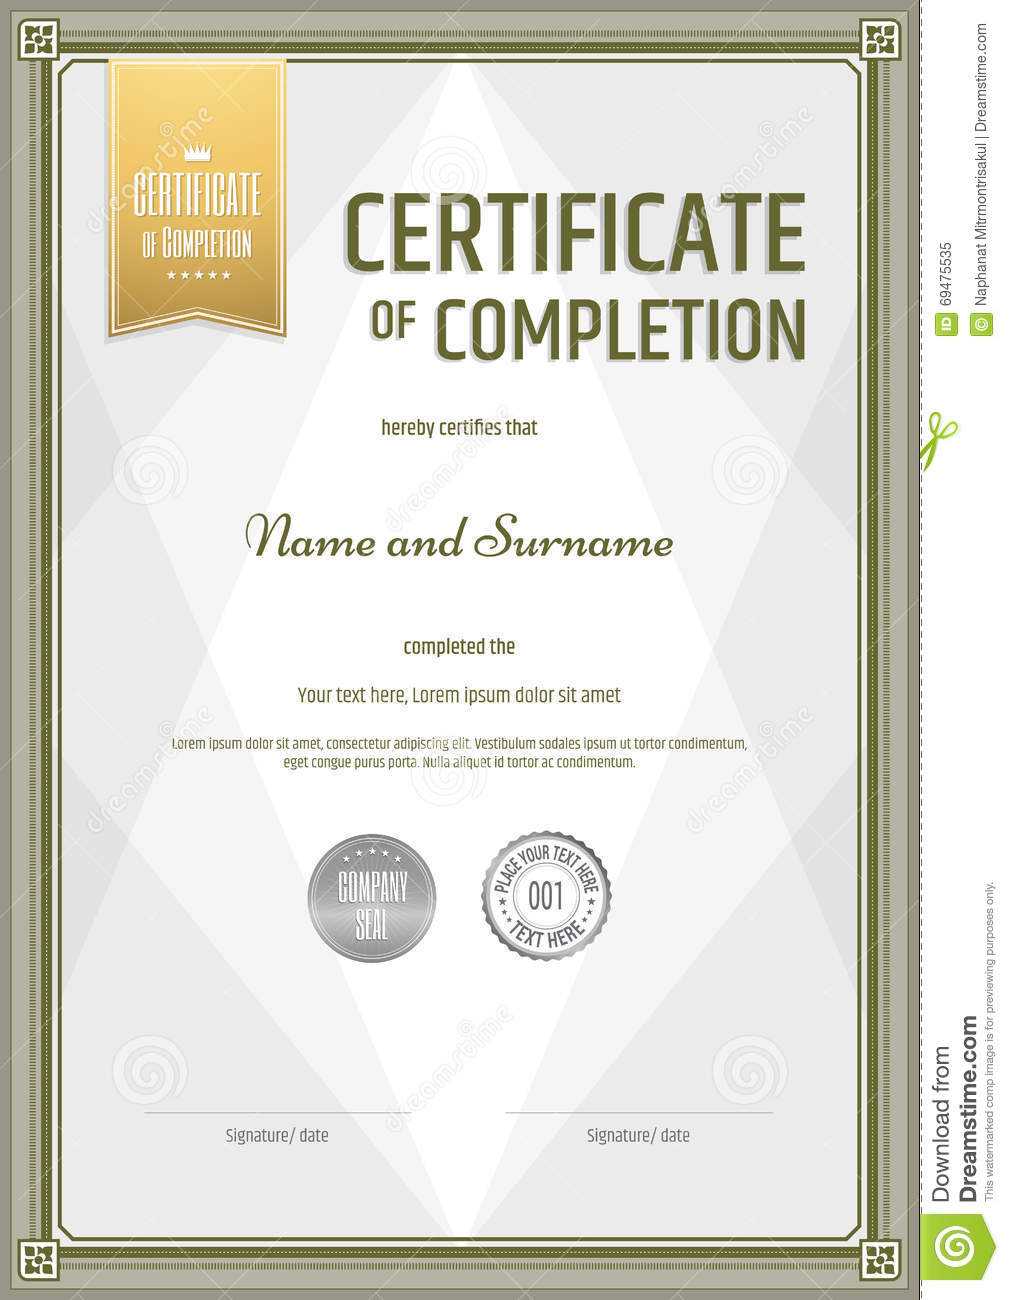 Certificate Of Completion Template In Portrait Stock Vector Regarding Certification Of Completion Template